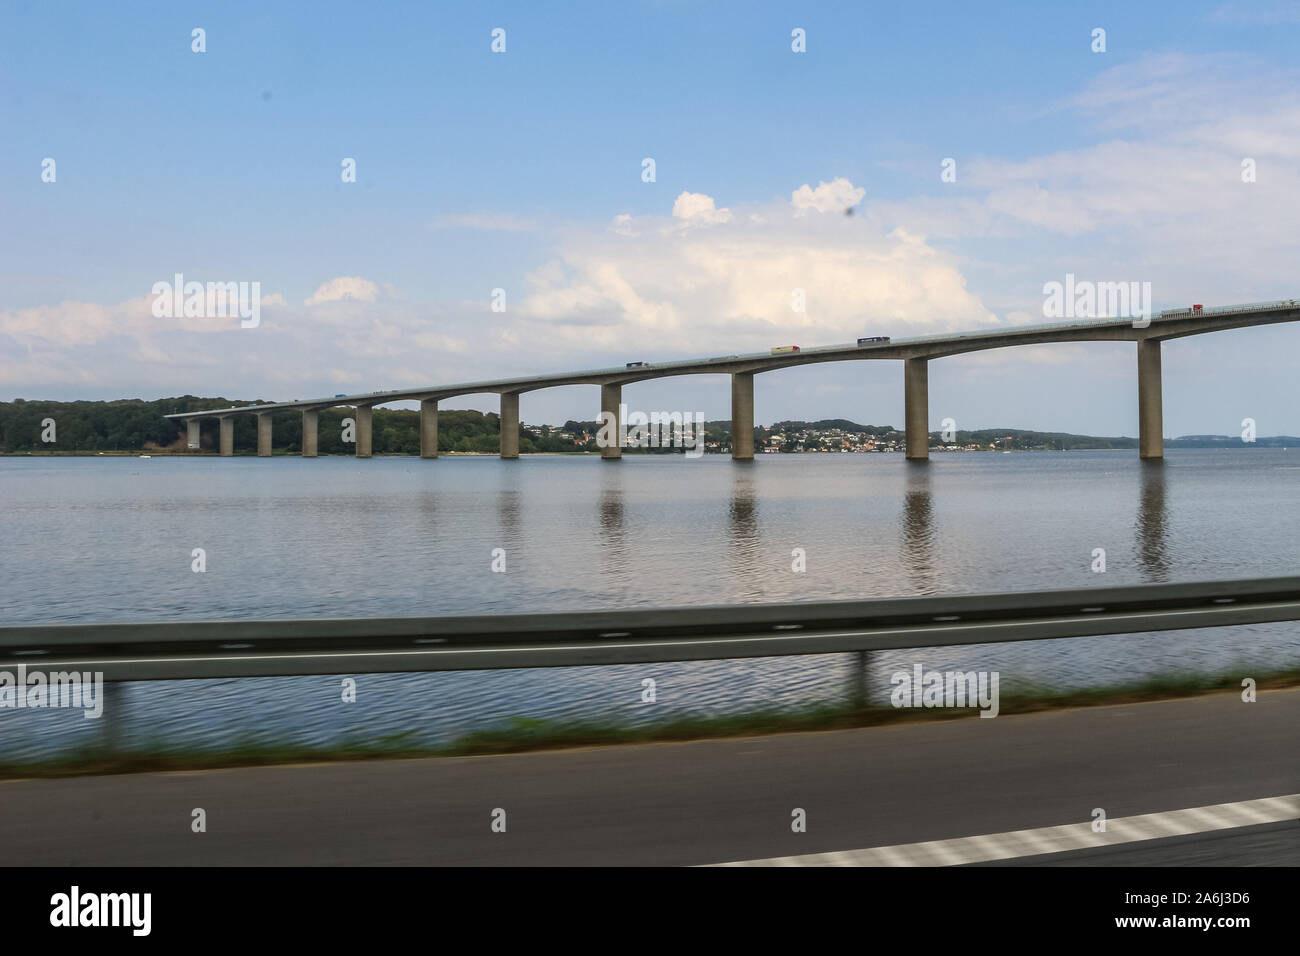 Vejle Fjord Bridge ( Vejlefjordbroen) is seen in Vejle , Denmark on 30 July 2019 The bridge over the Vejle Fiord is 1712 m long, the longest span is 110 m, and the maximum clearance to the sea is 40 m.  © Michal Fludra / Alamy Live News Stock Photo